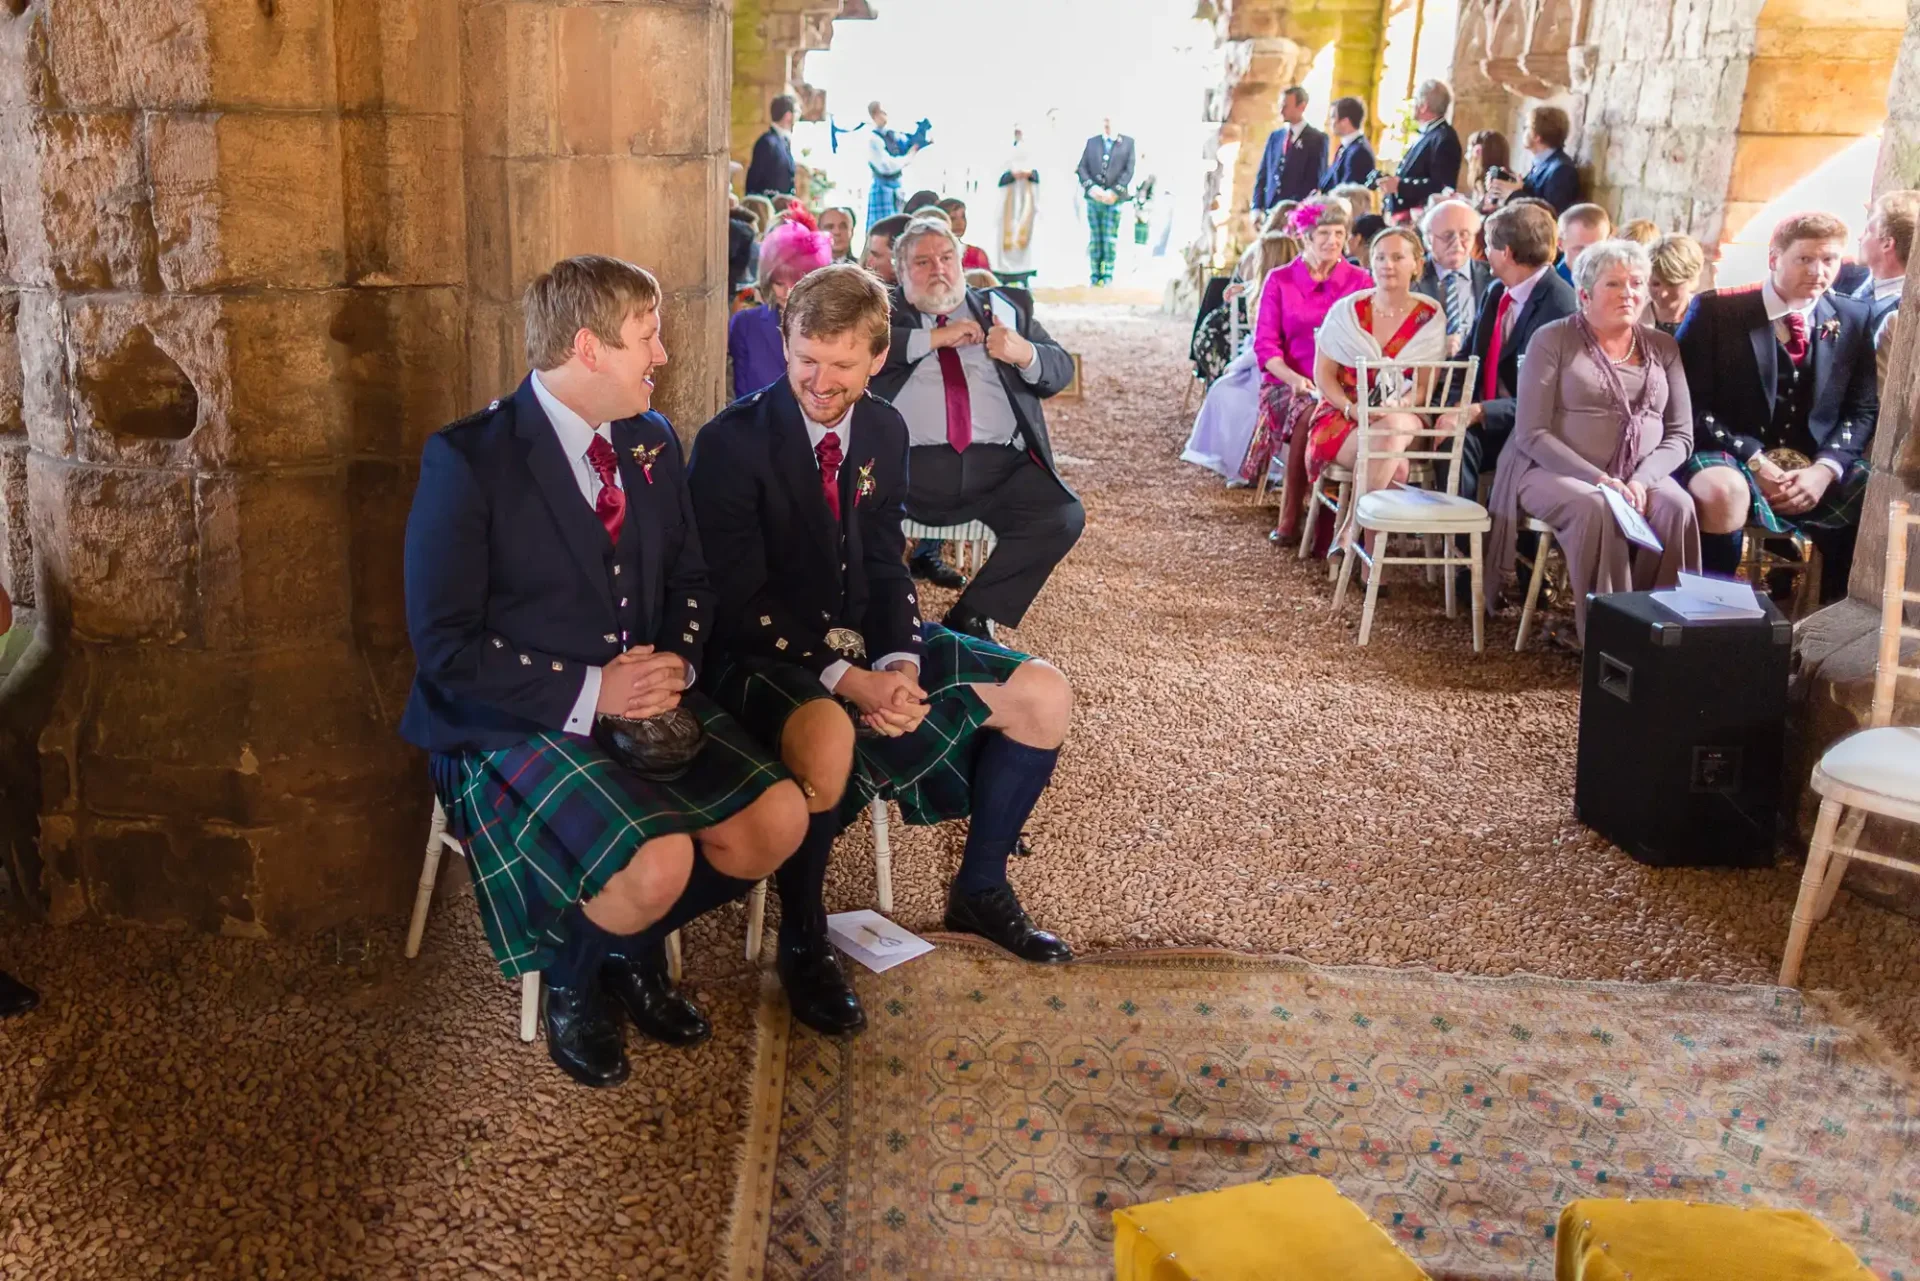 Two men in kilts sitting and chatting inside a historic building with guests in the background at a wedding ceremony.